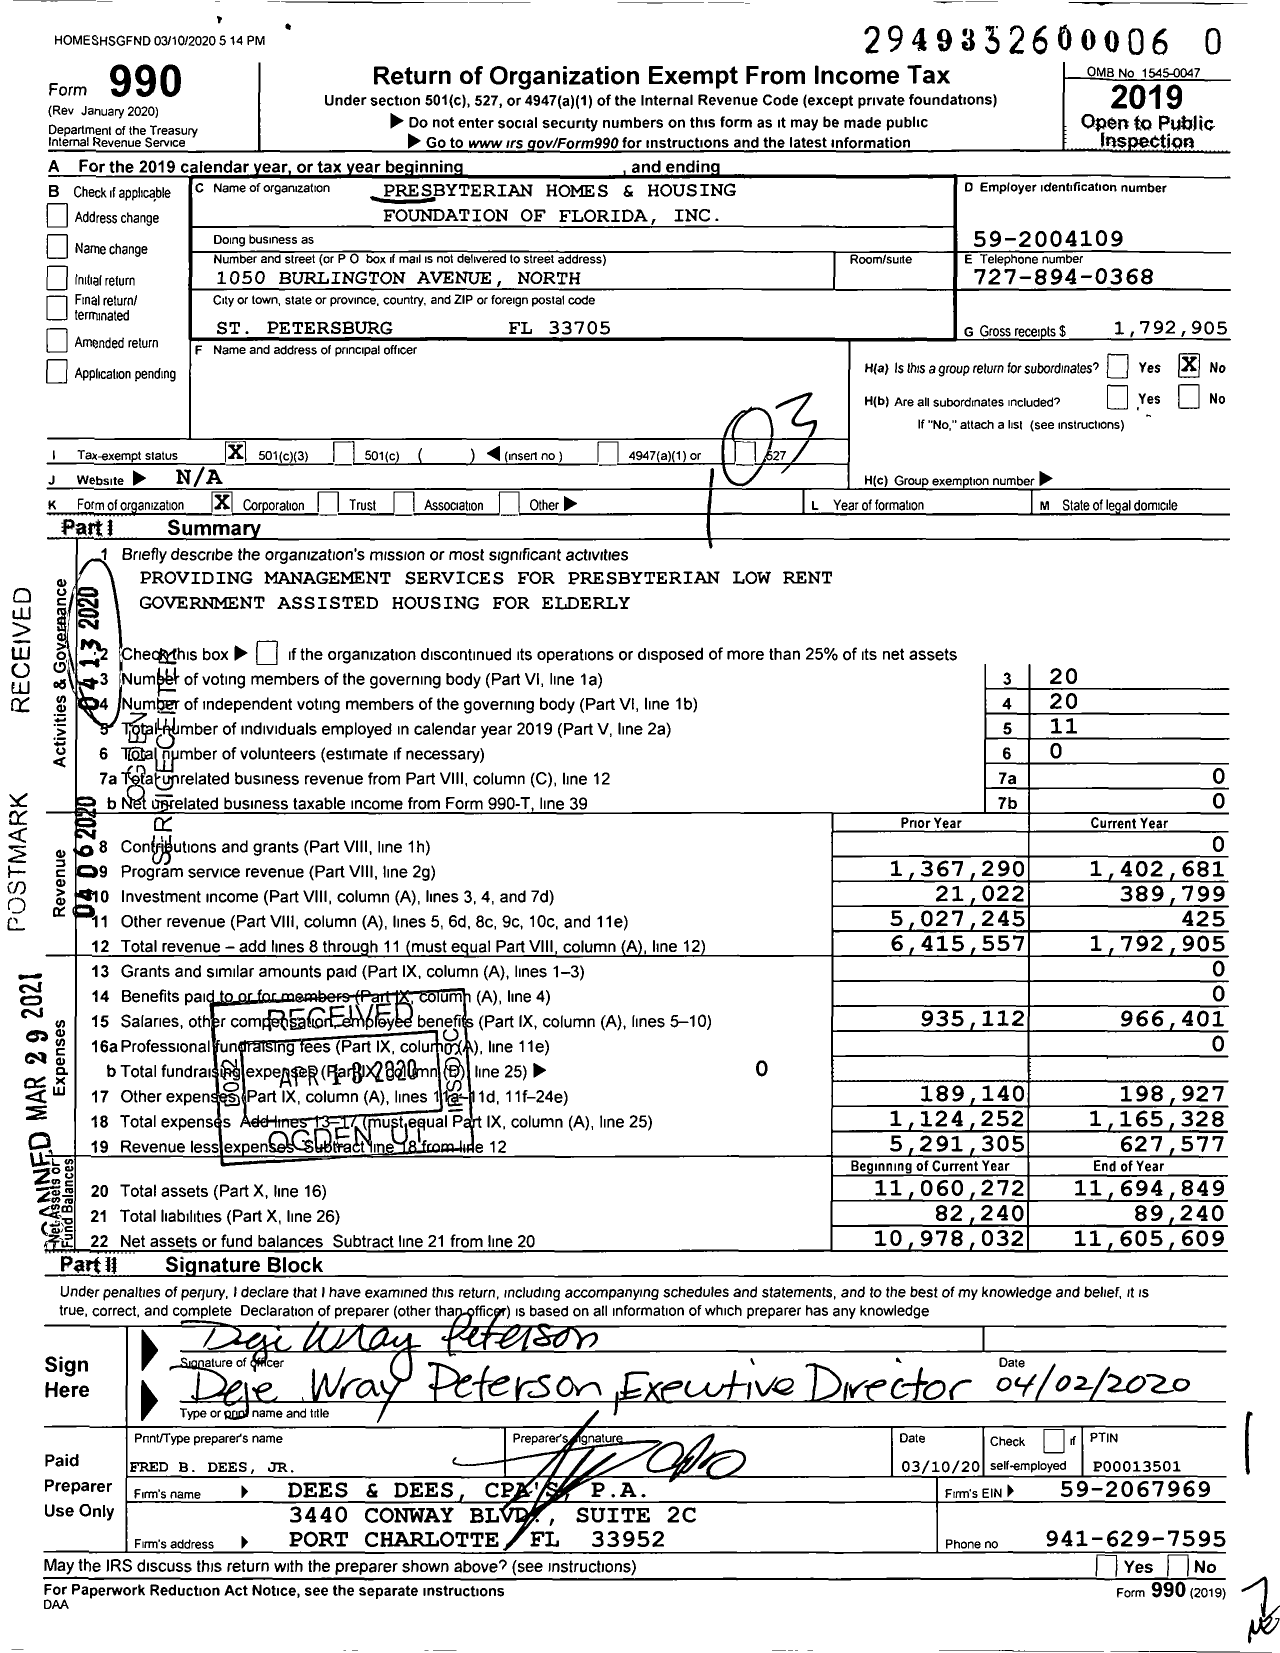 Image of first page of 2019 Form 990 for Presbyterian Homes and Housing Foundation of Florida